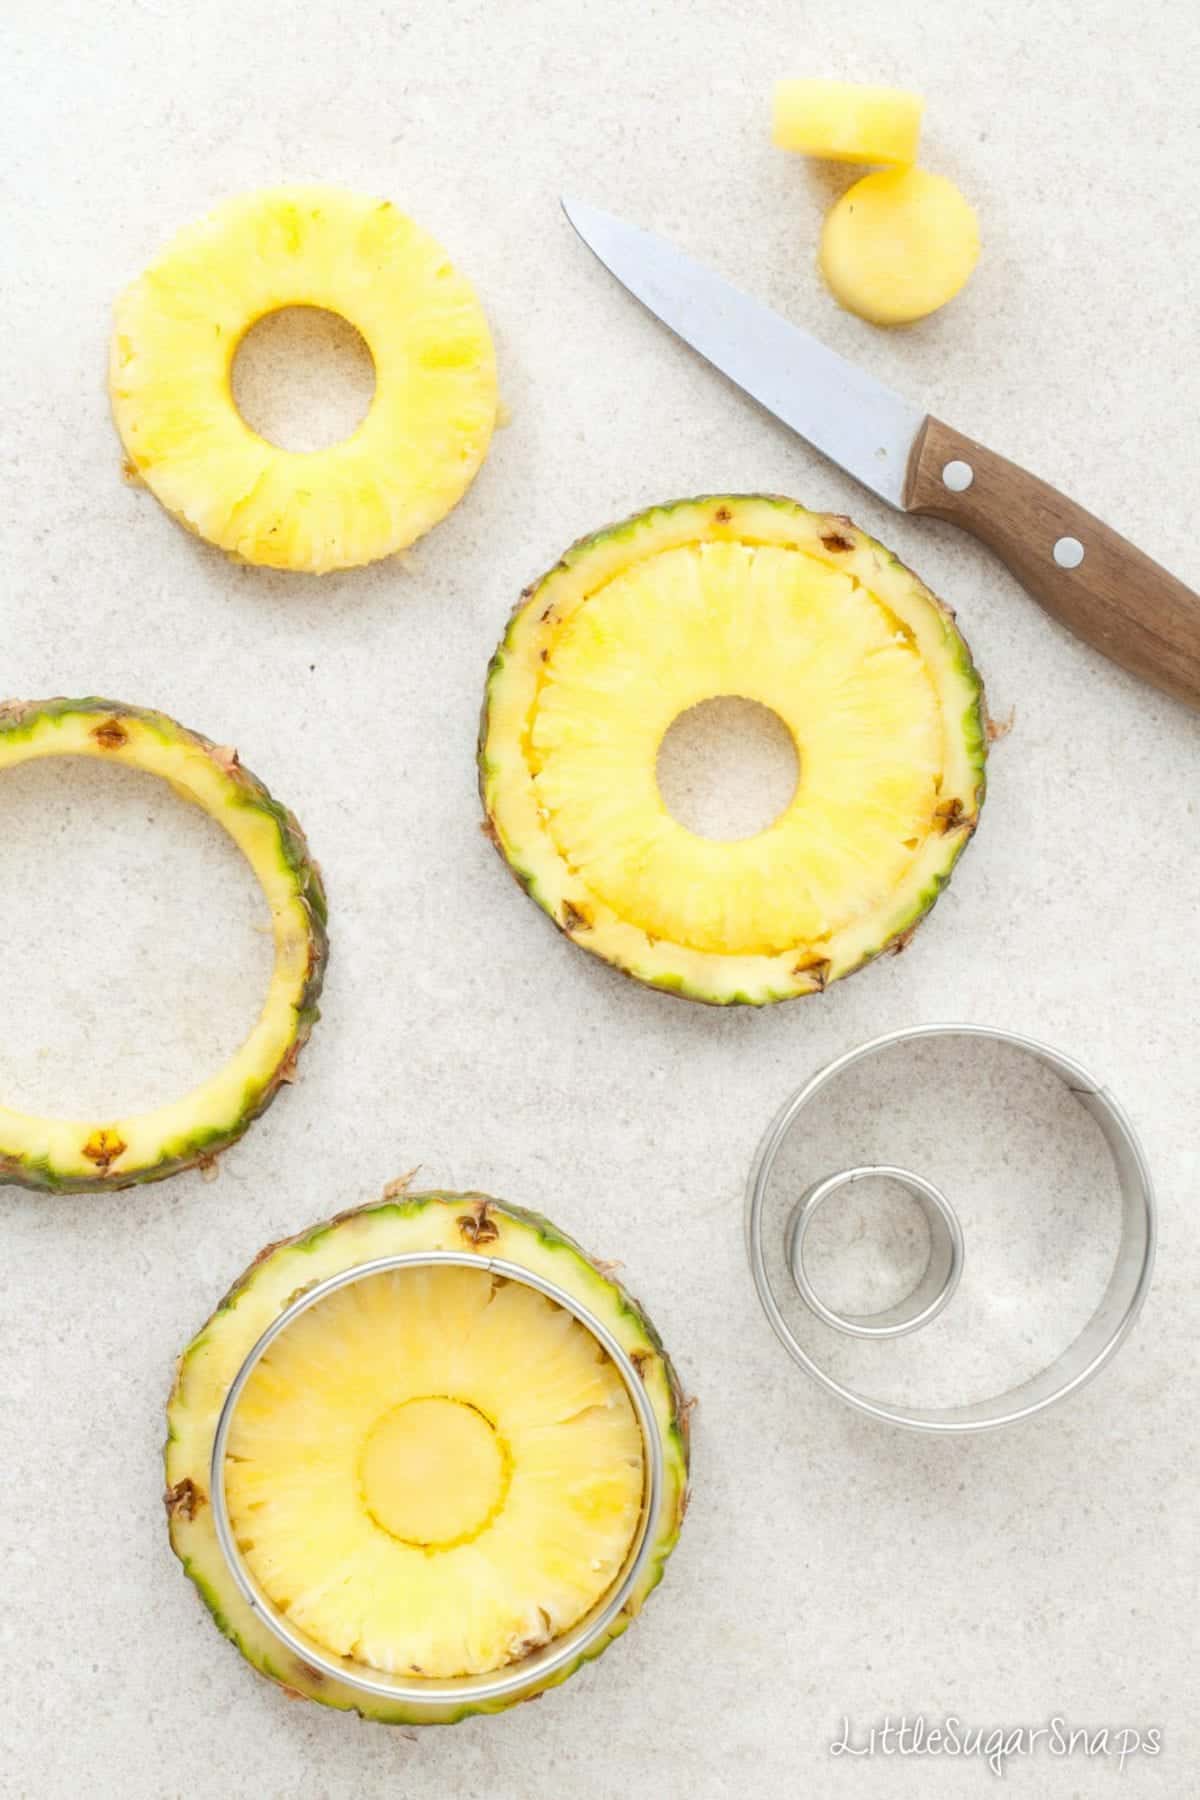 Cutting fresh pineapple into rings using cookie cutters